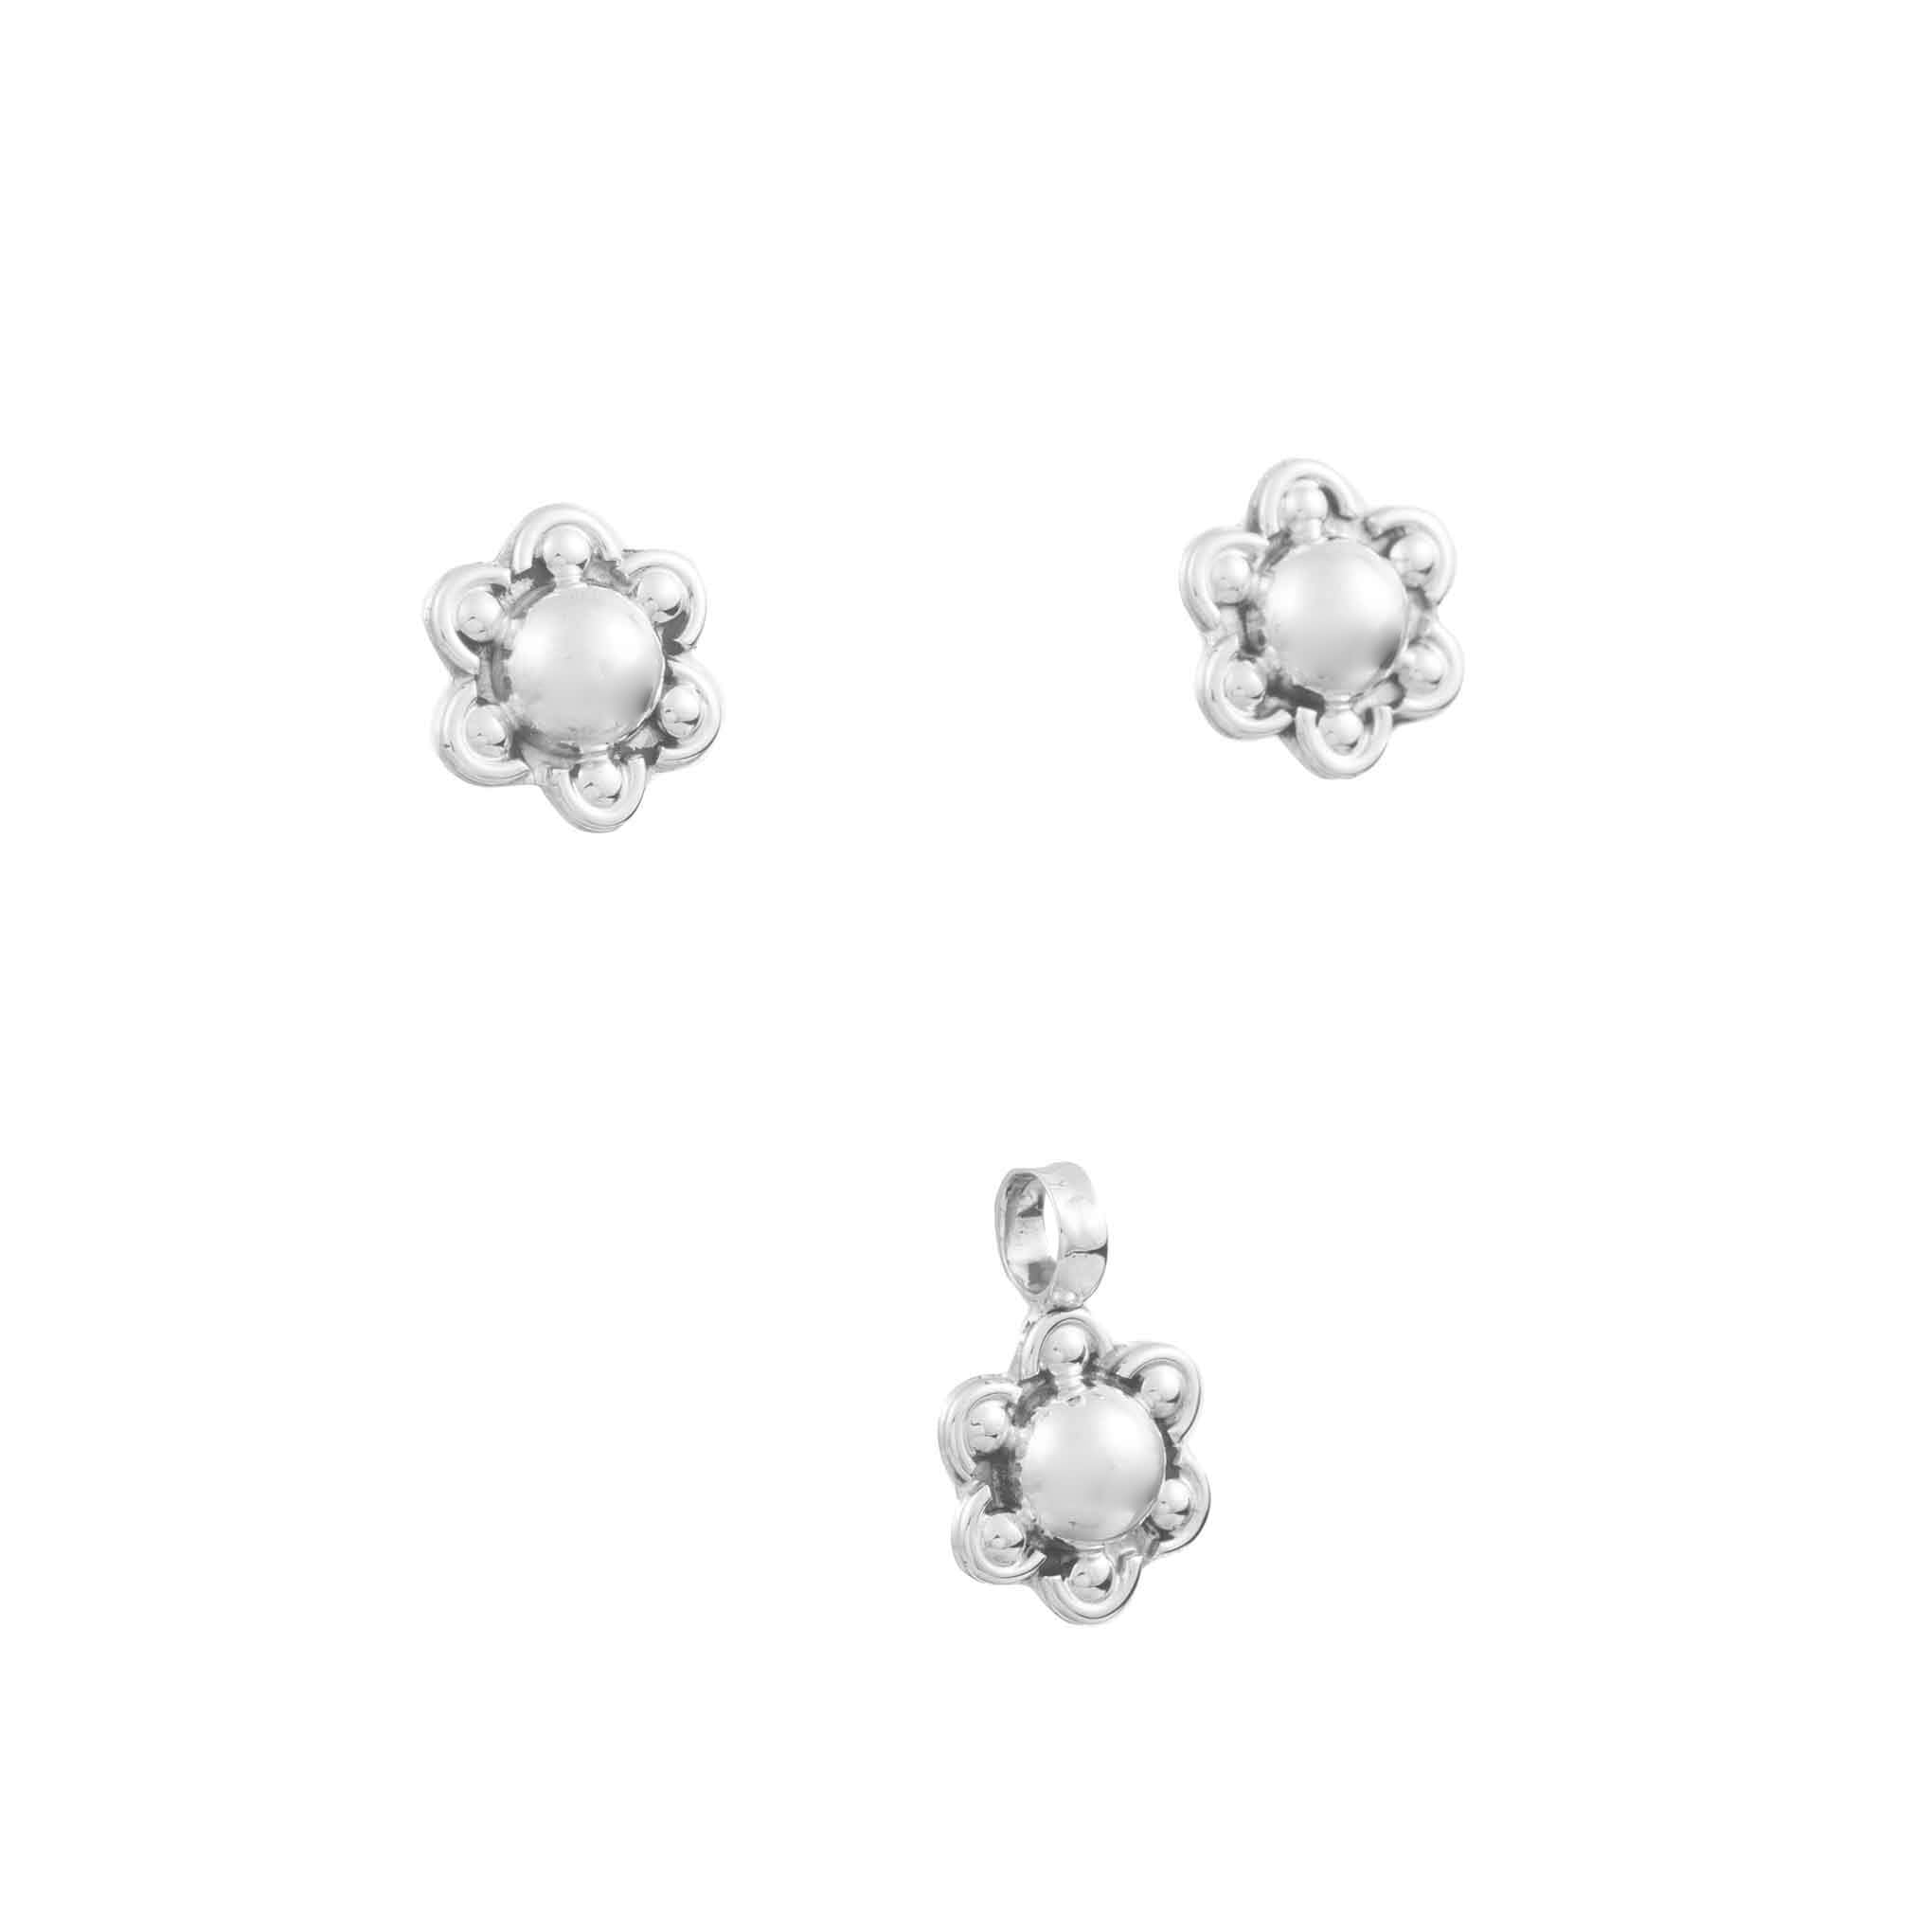 Silver set of flowers with circular details